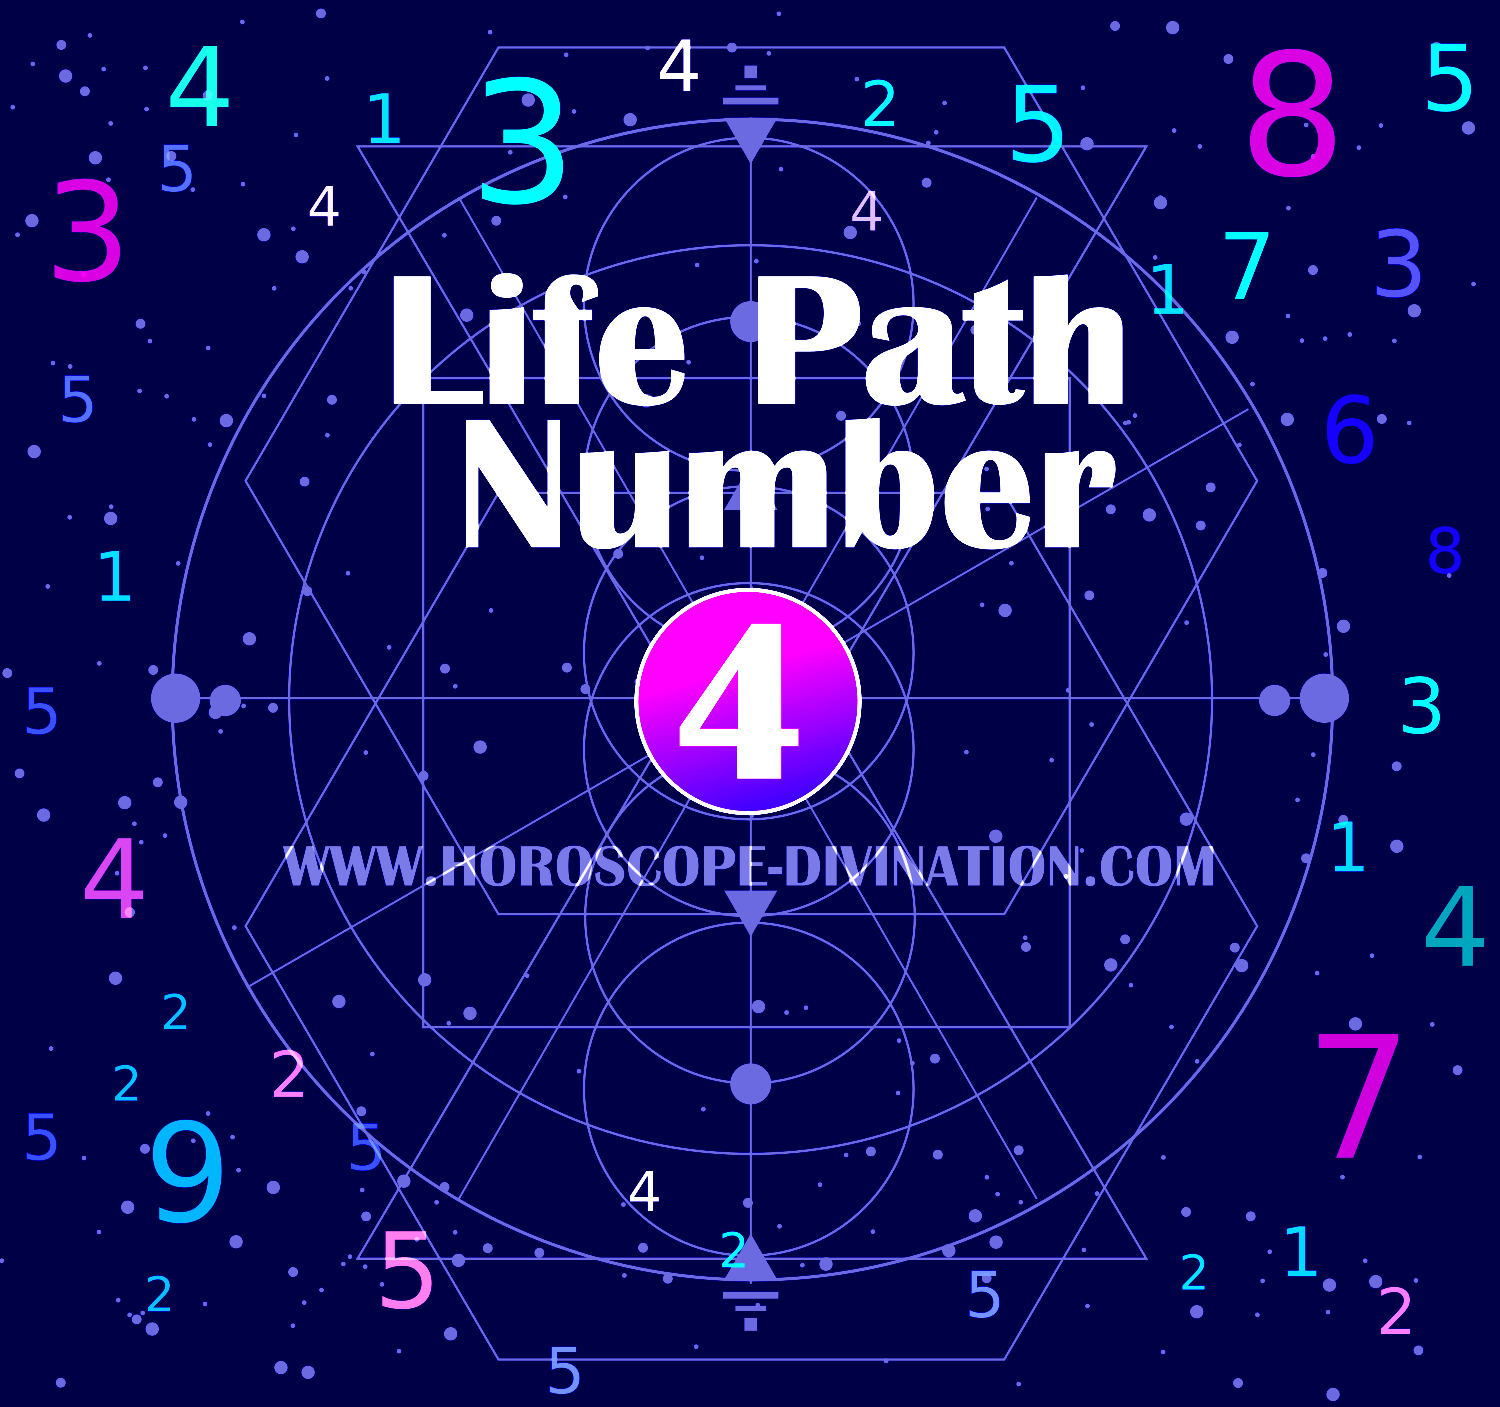 Life Path Number 4 - Numerology